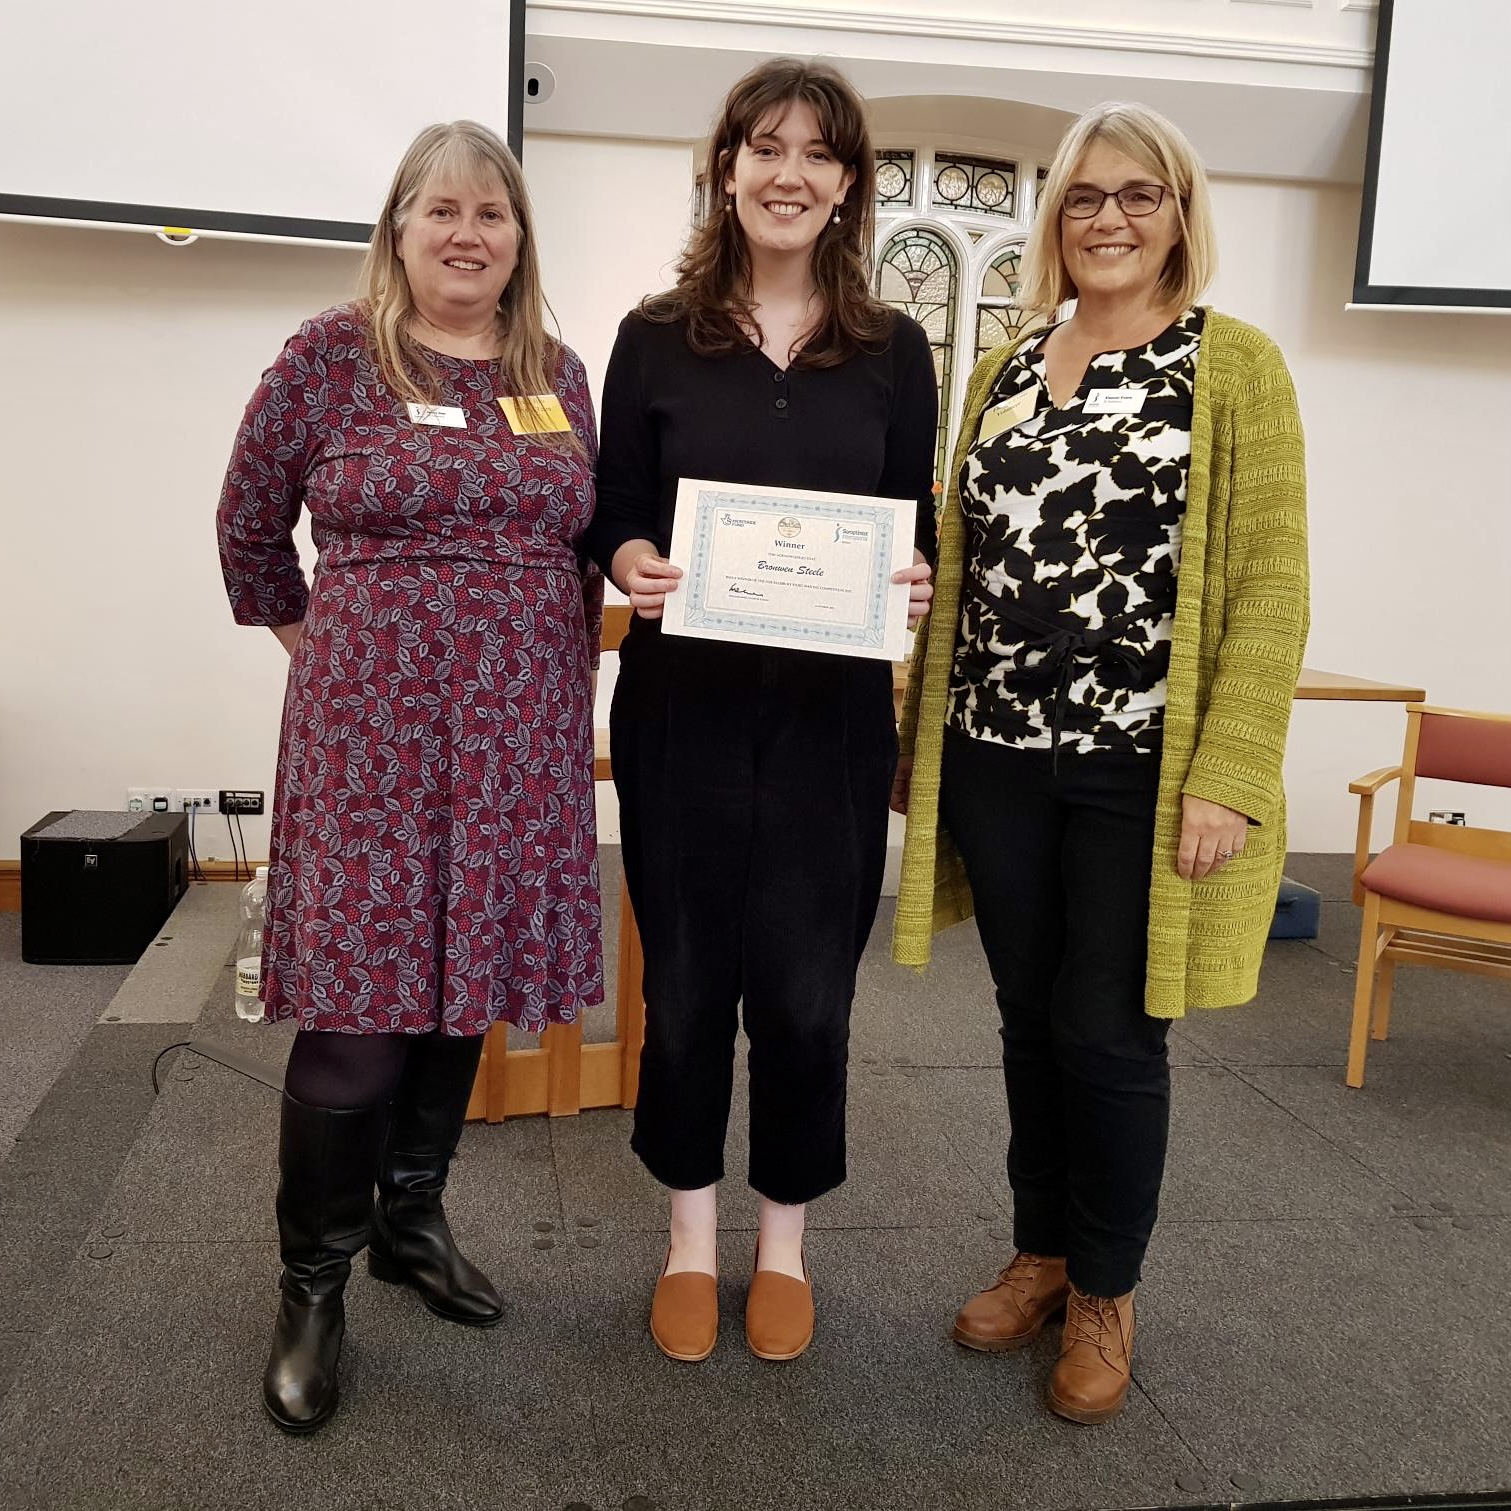 Bronwen Steele one of the winners being presented with her certificate by Club President Eleanor and HSS Project Manager Jenny